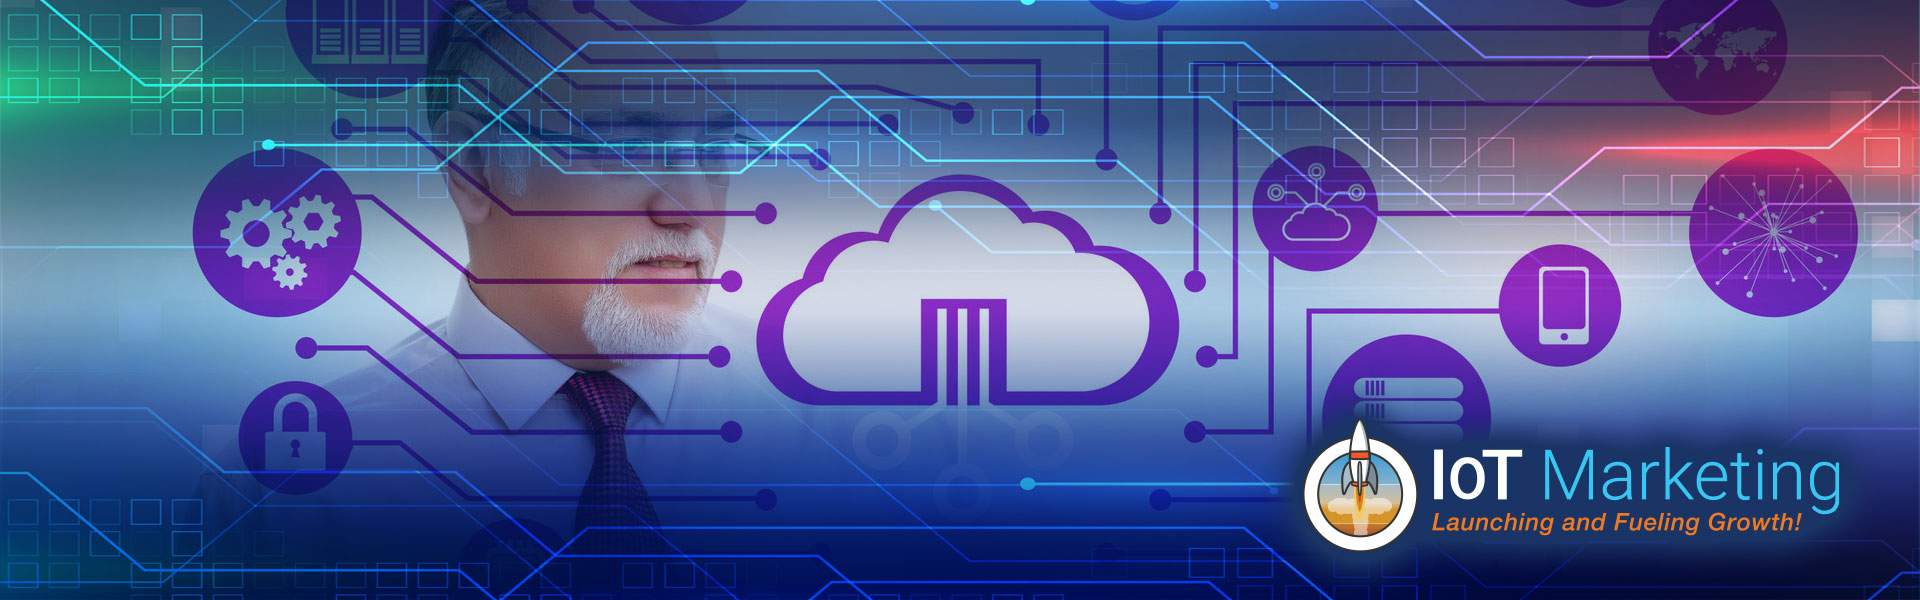 Cloud and Edge Computing: What Are Their Differences and Similarities?